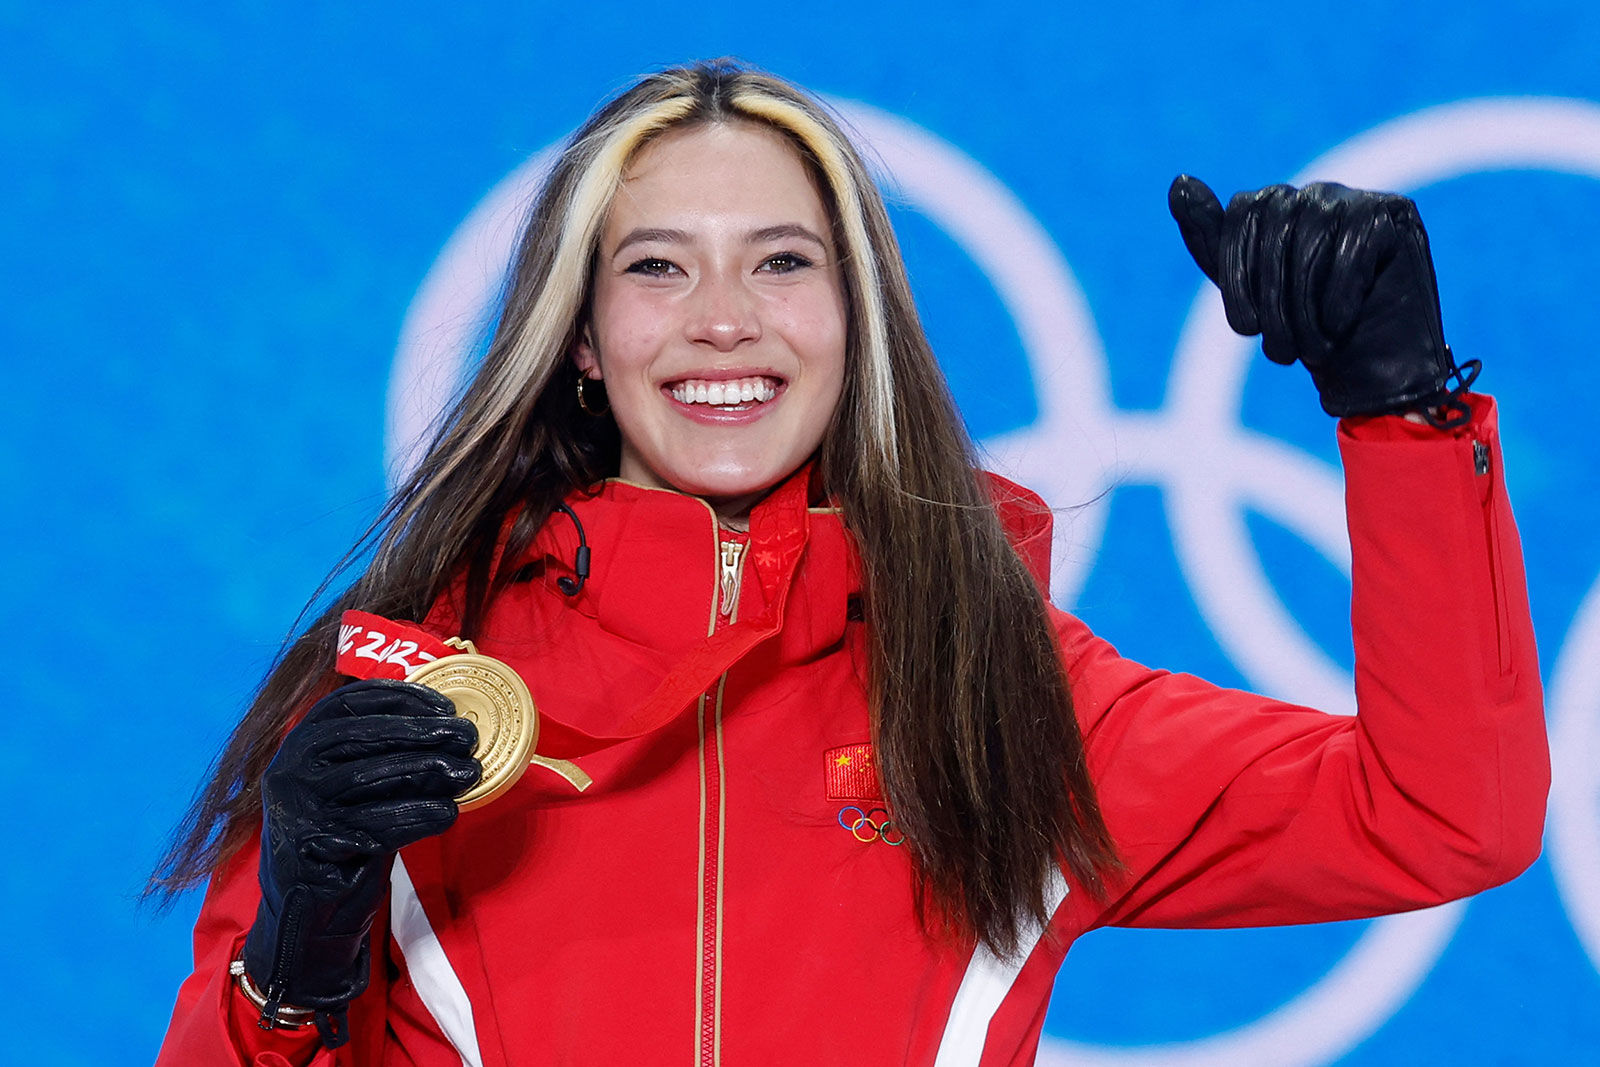 Eileen Gu celebrates during the medal ceremony for the women's freeski halfpipe event on February 18.